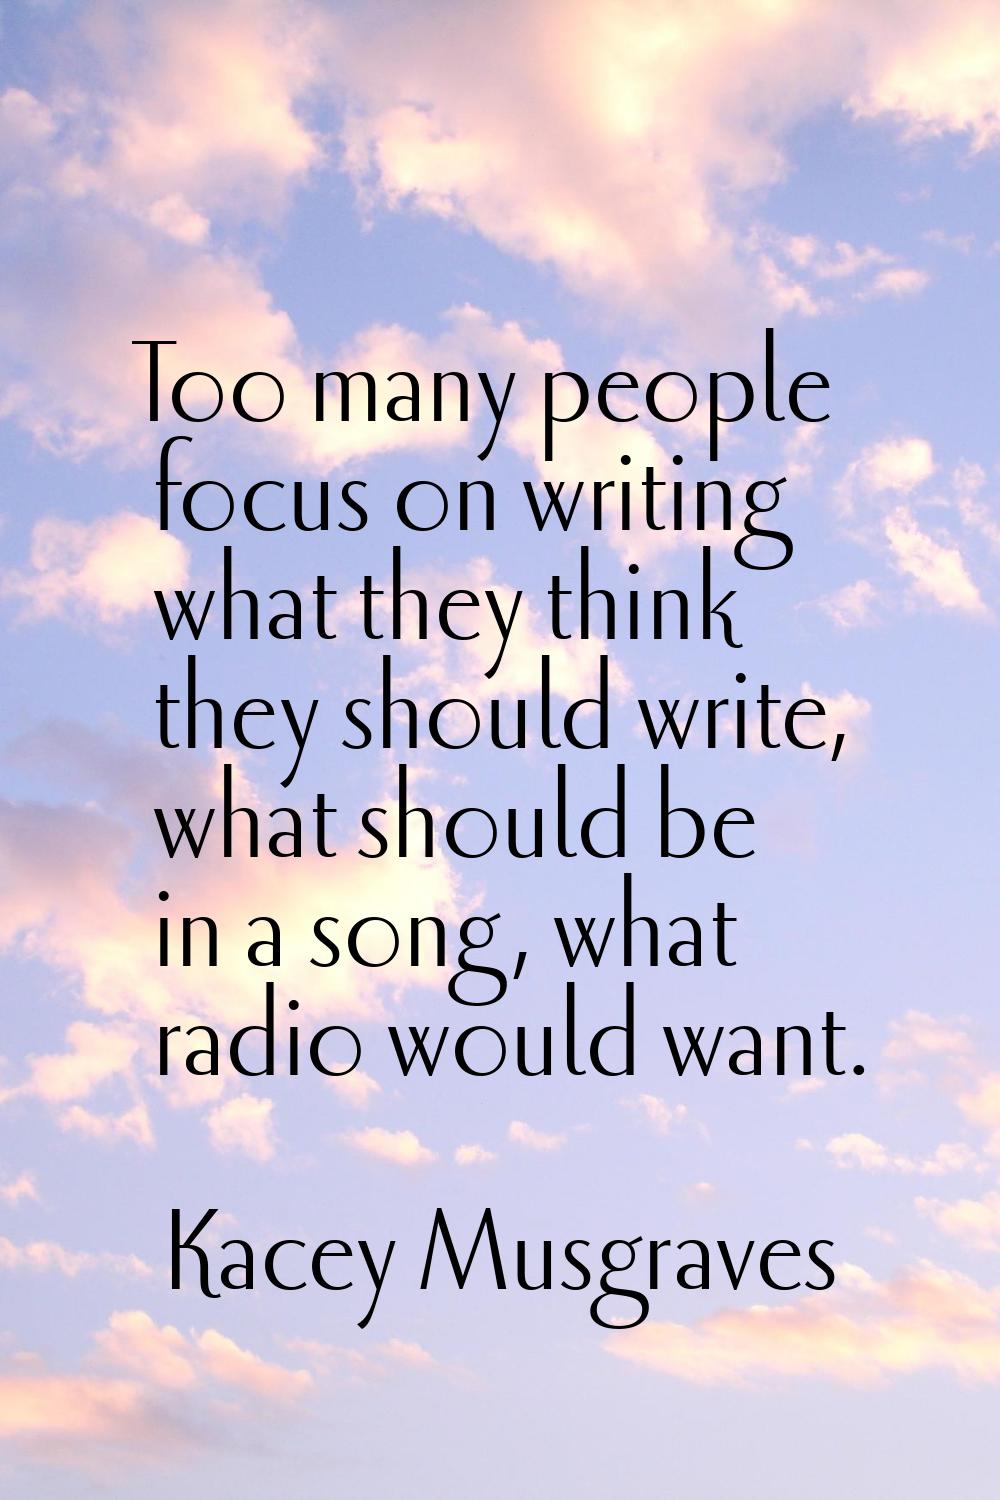 Too many people focus on writing what they think they should write, what should be in a song, what 